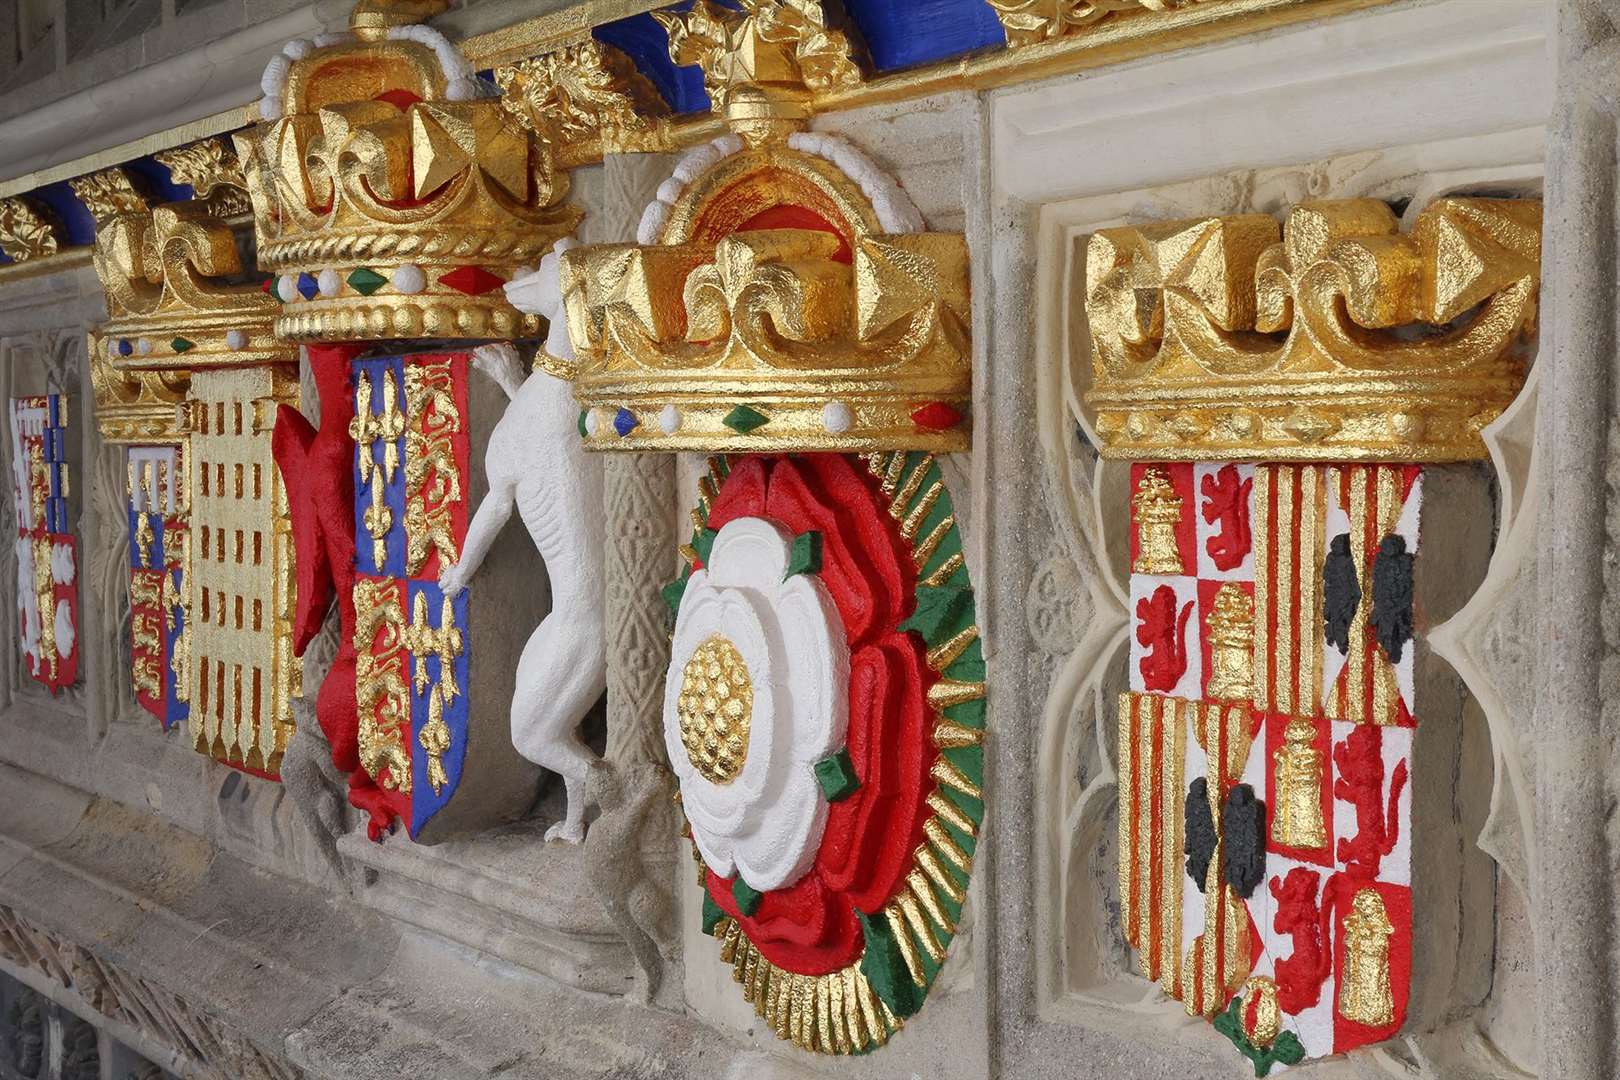 The colourful restoration of the Christ Church Gate